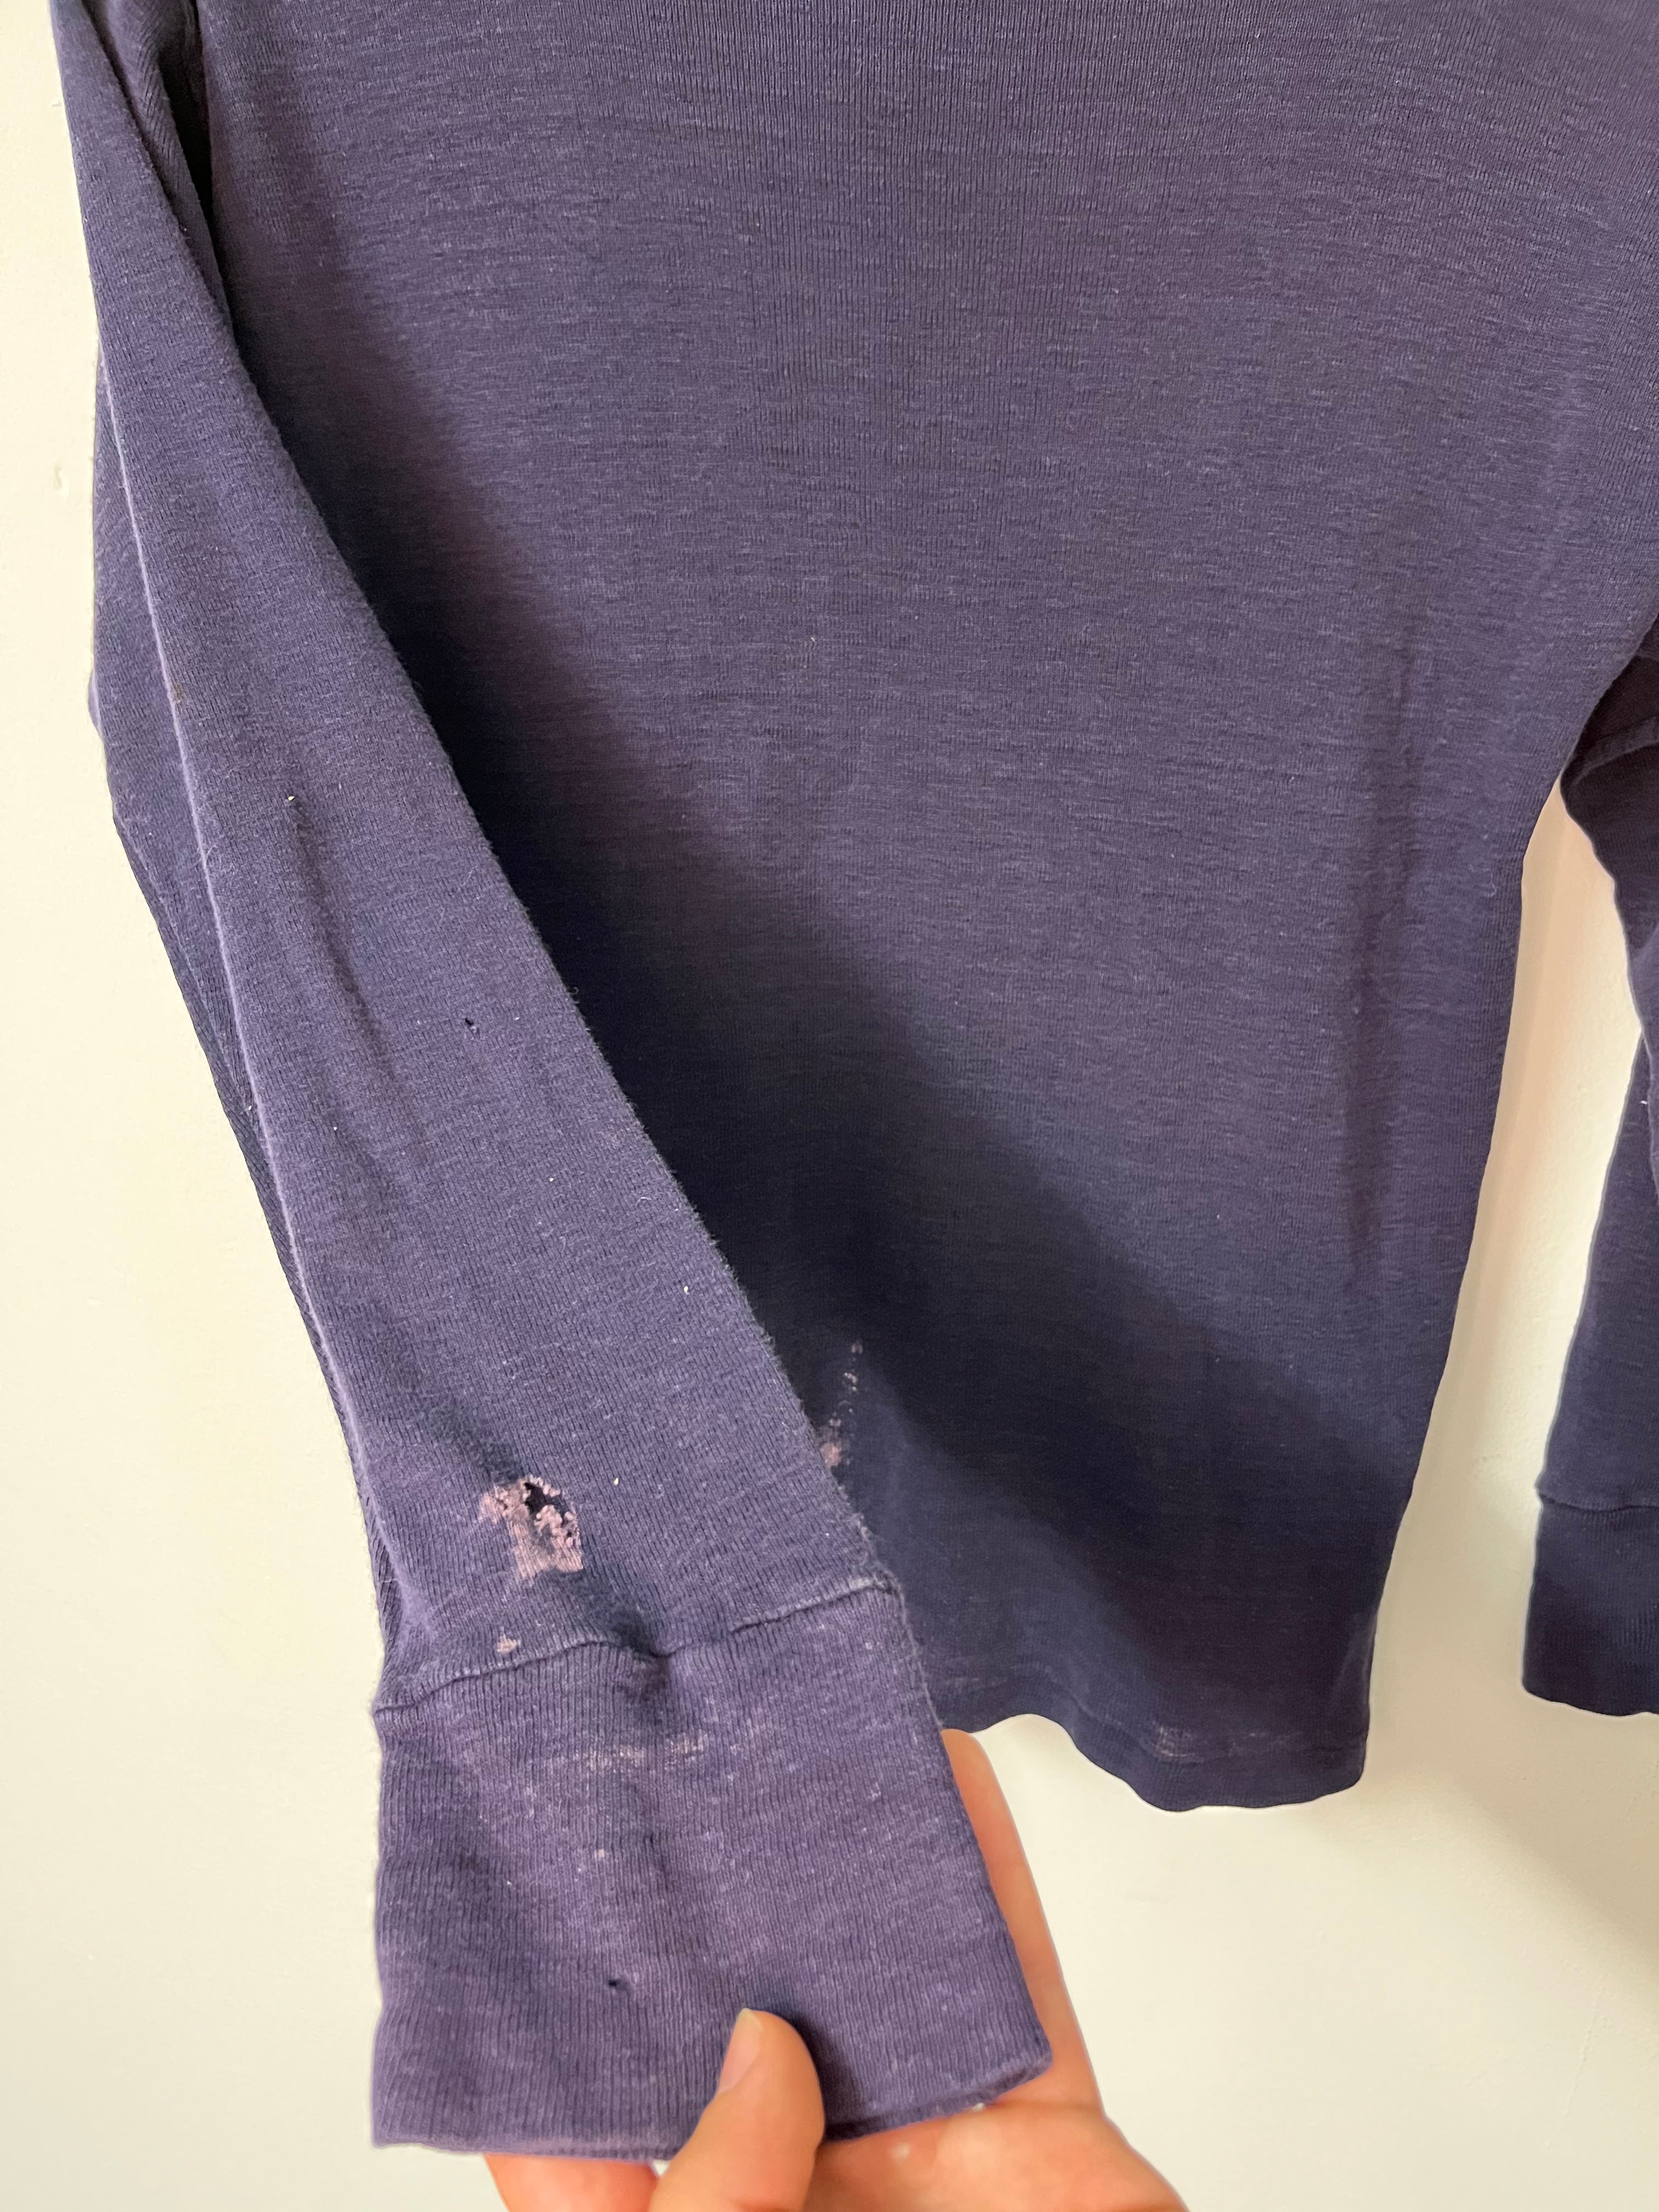 60s Distressed Long Sleeve Turtleneck T-Shirt- Washed Navy Blue and Light Distressing- S/M